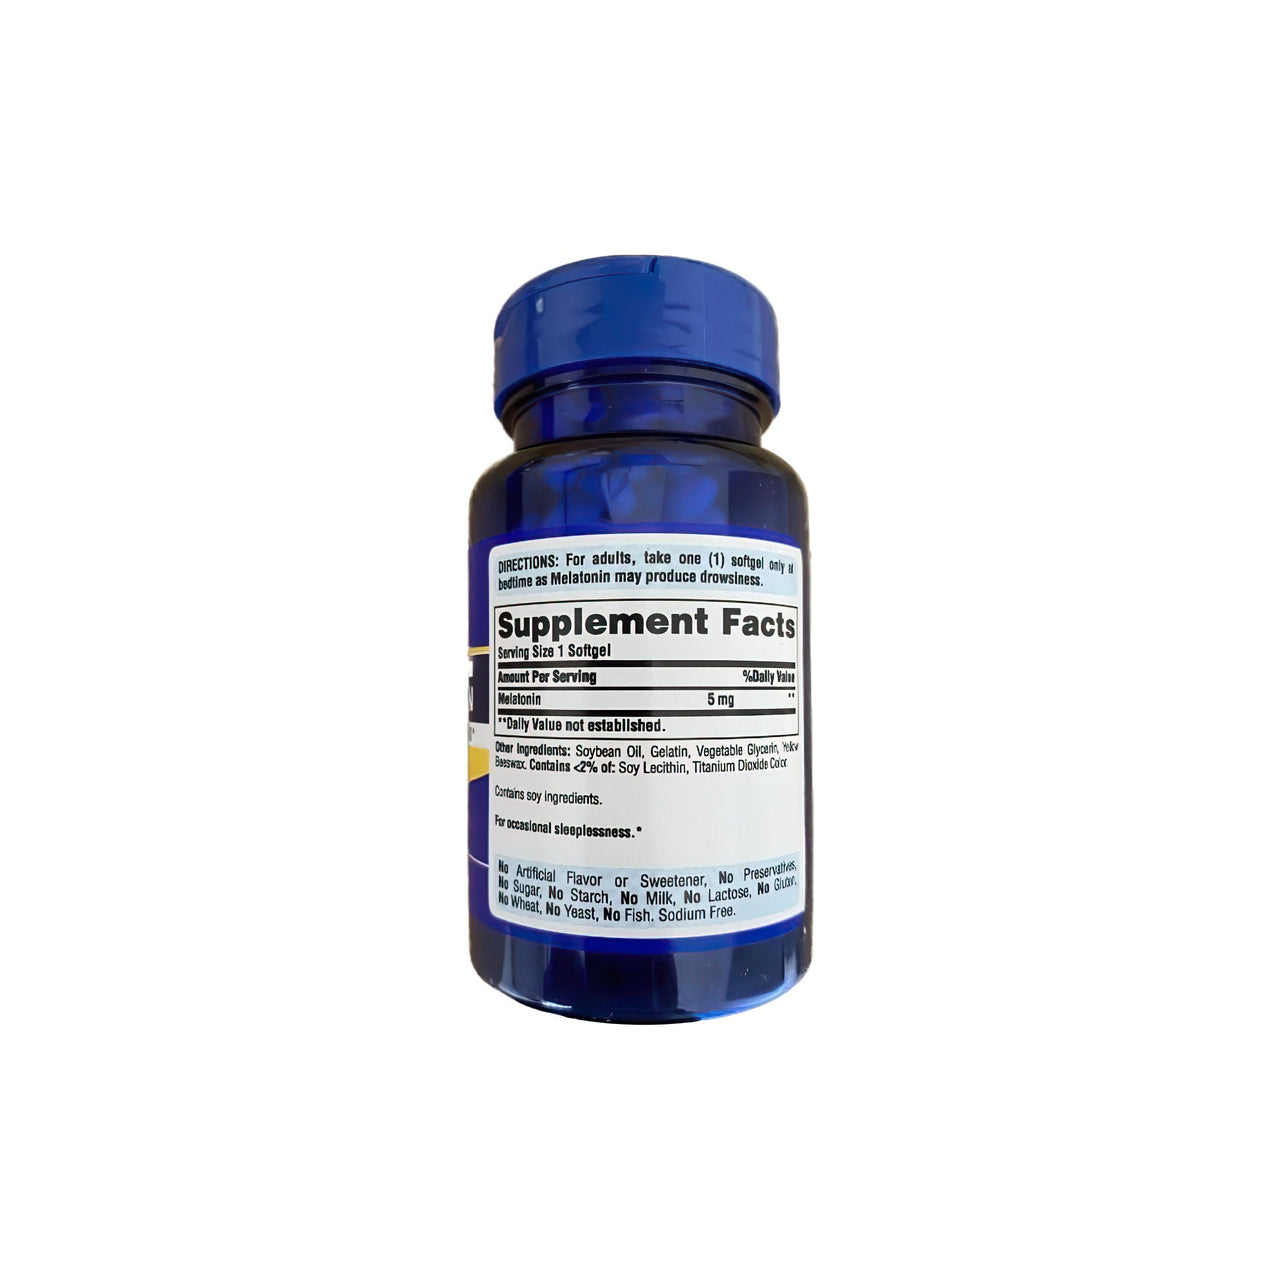 A bottle of Extra Strength Melatonin 5 mg 60 rapid release softgels by Puritan's Pride on a white background.